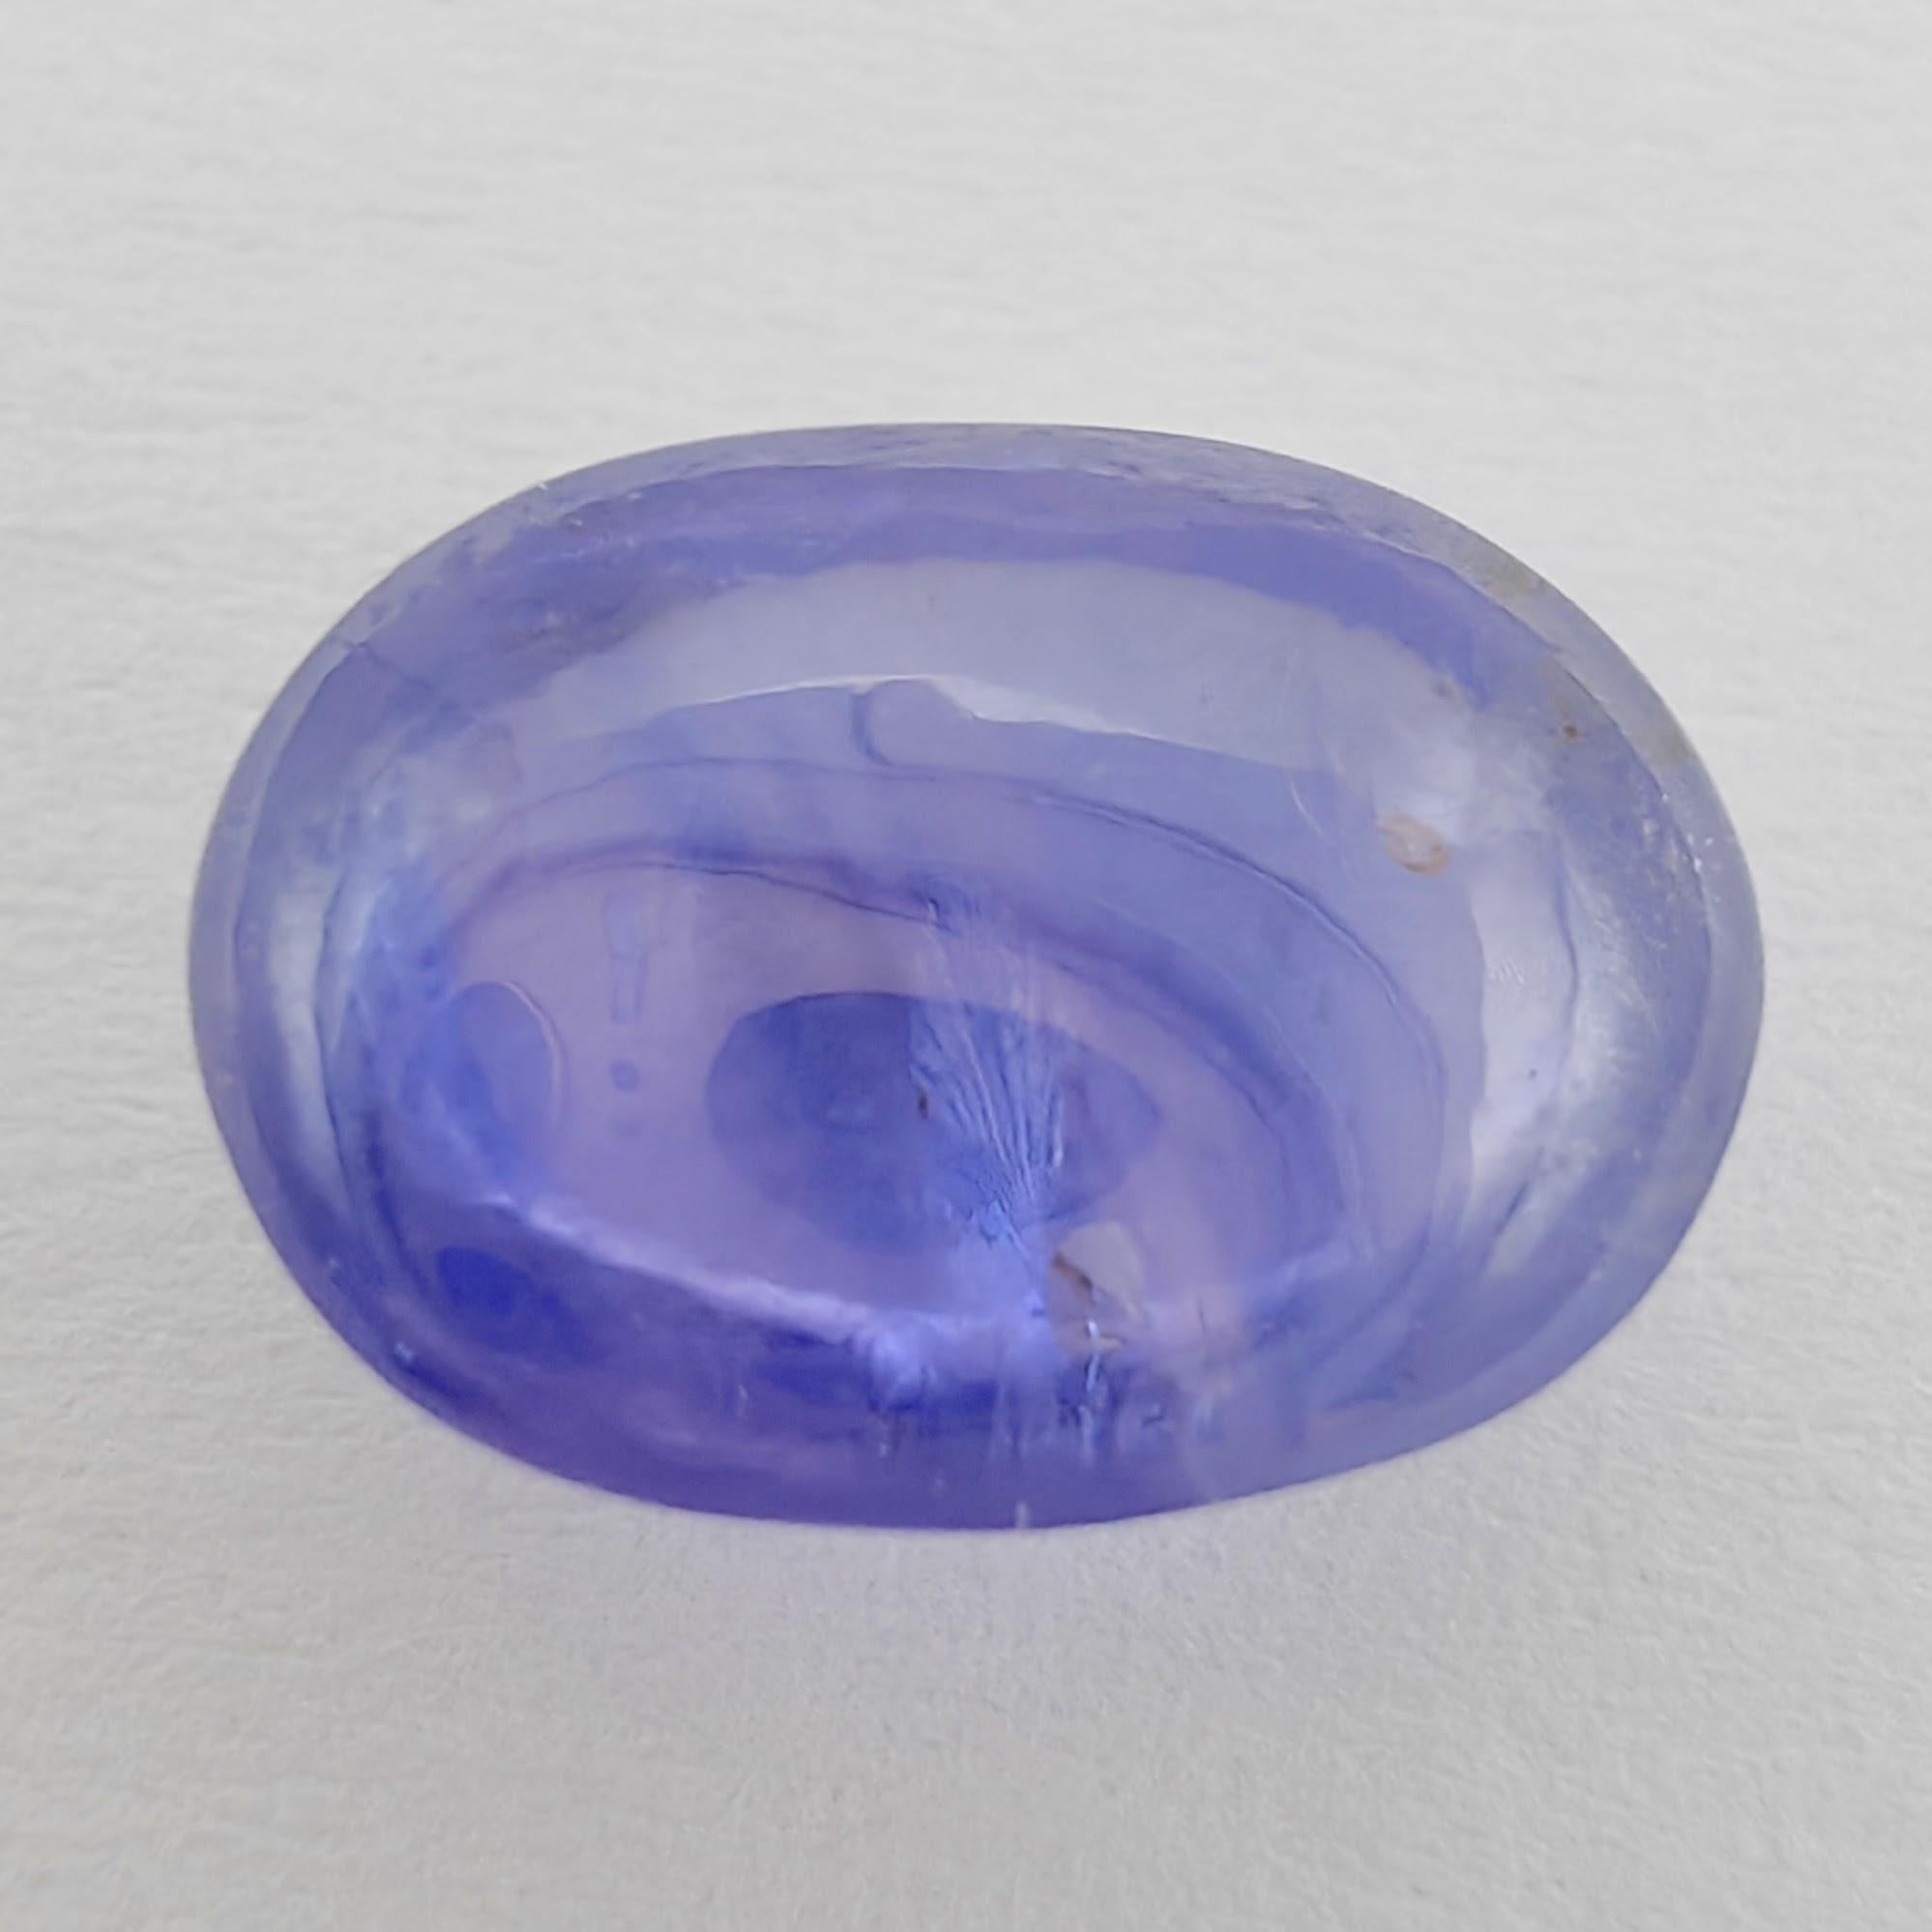 Feast your eyes on this exquisite natural Corundum Sapphire. Weighing at an impressive 4.27 carats and precisely cut in a classic oval cabochon shape, it is truly a gem to behold. Its measurements are an ample 10.25 x 7.38 x 5.31 mm, making it a